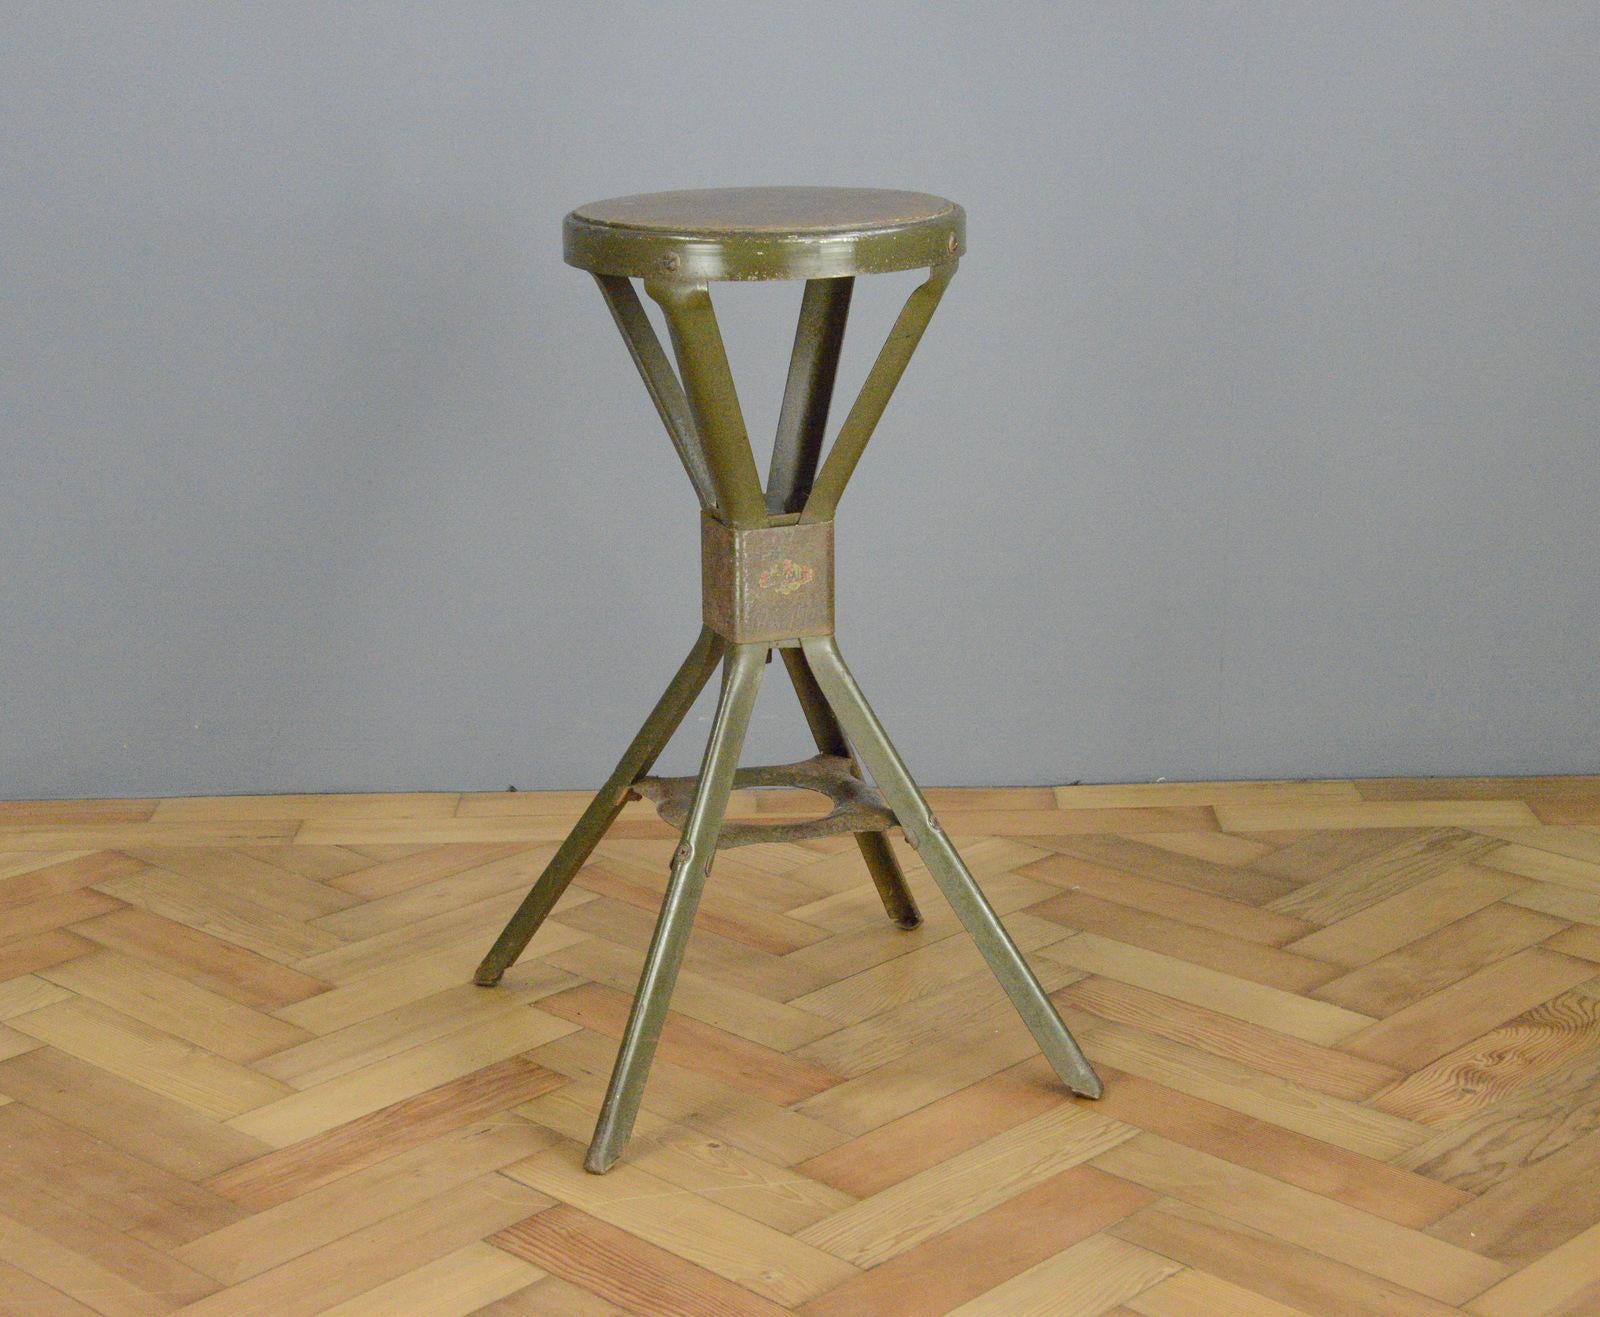 Industrial Stool By Evertaut circa 1940s

- Steel frame
- Original Ply seat
- Original green paint
- Made by Evertaut, Birmingham
- English ~ 1940s
- 40cm wide x 40cm deep x 68cm tall

Condition Report

The chair has been kept in its